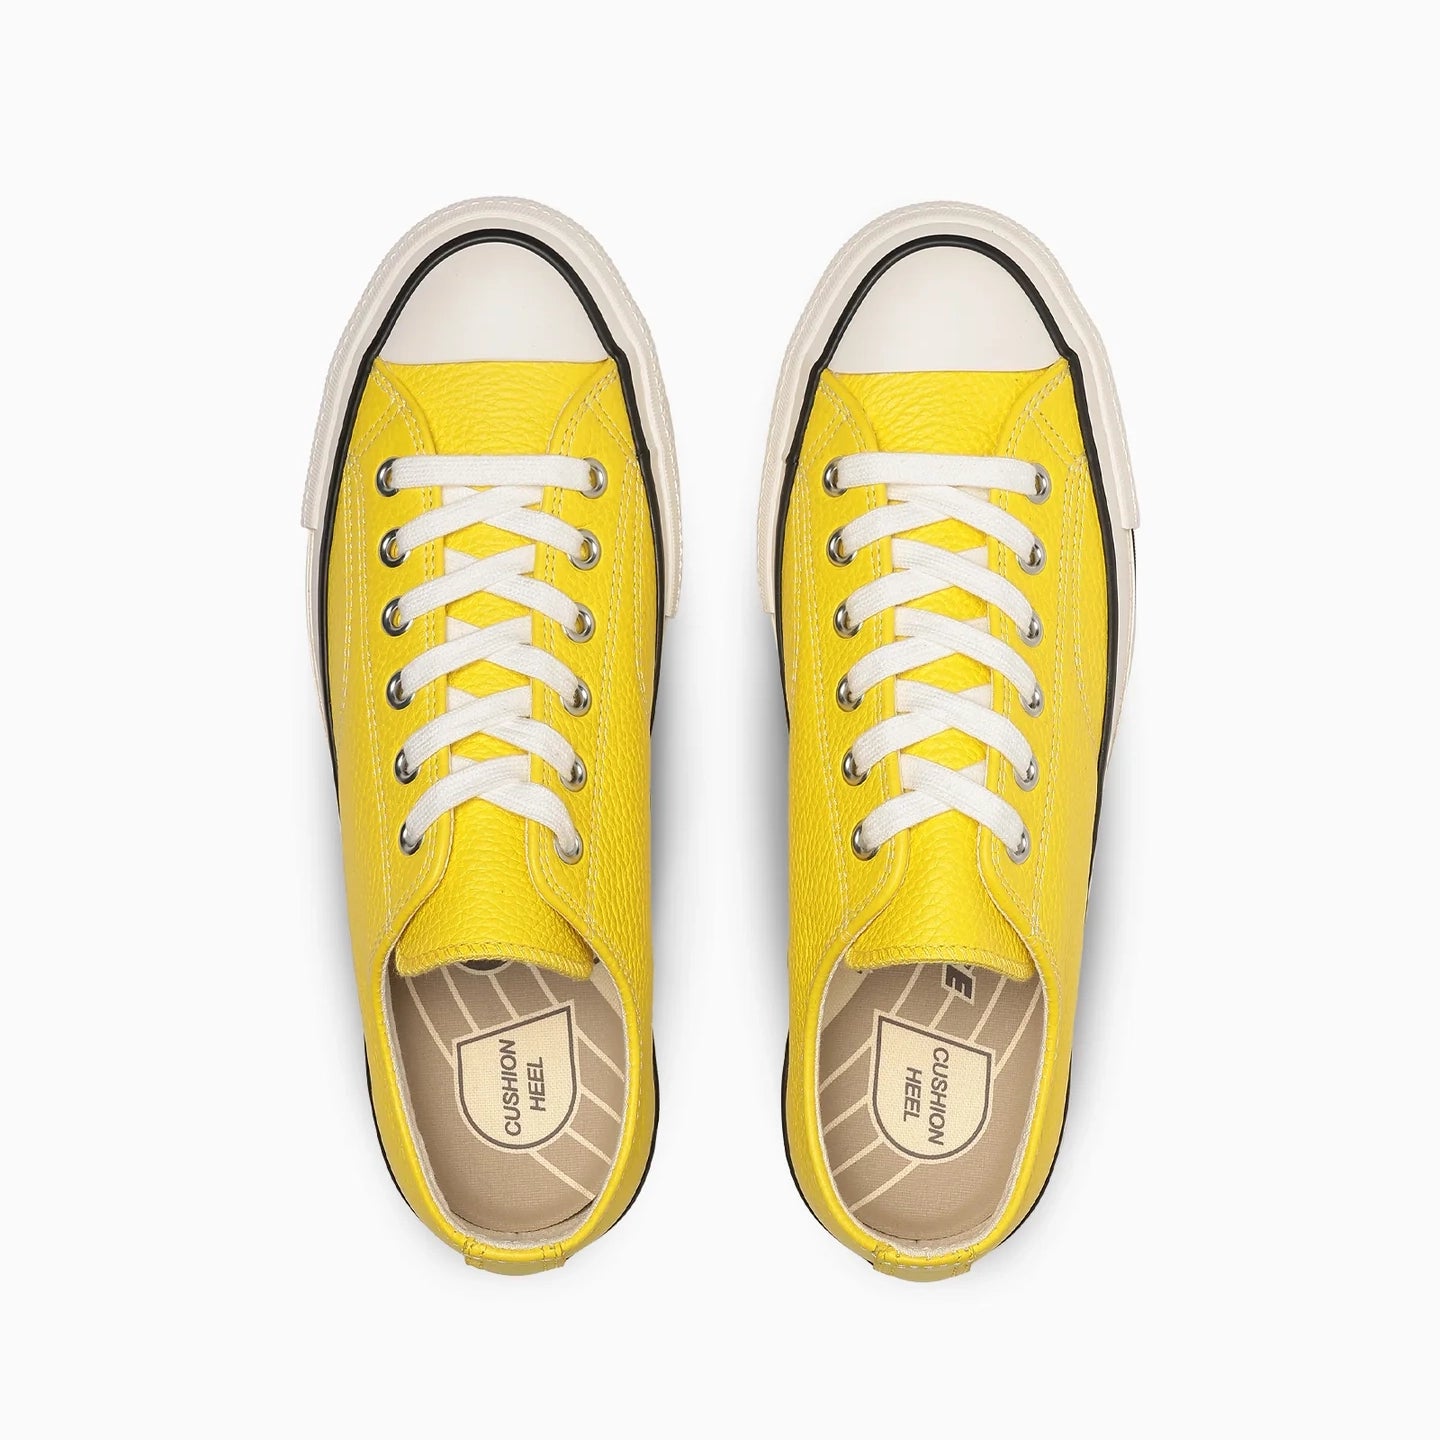 CHUCK TAYLOR LEATHER OX - YELLOW